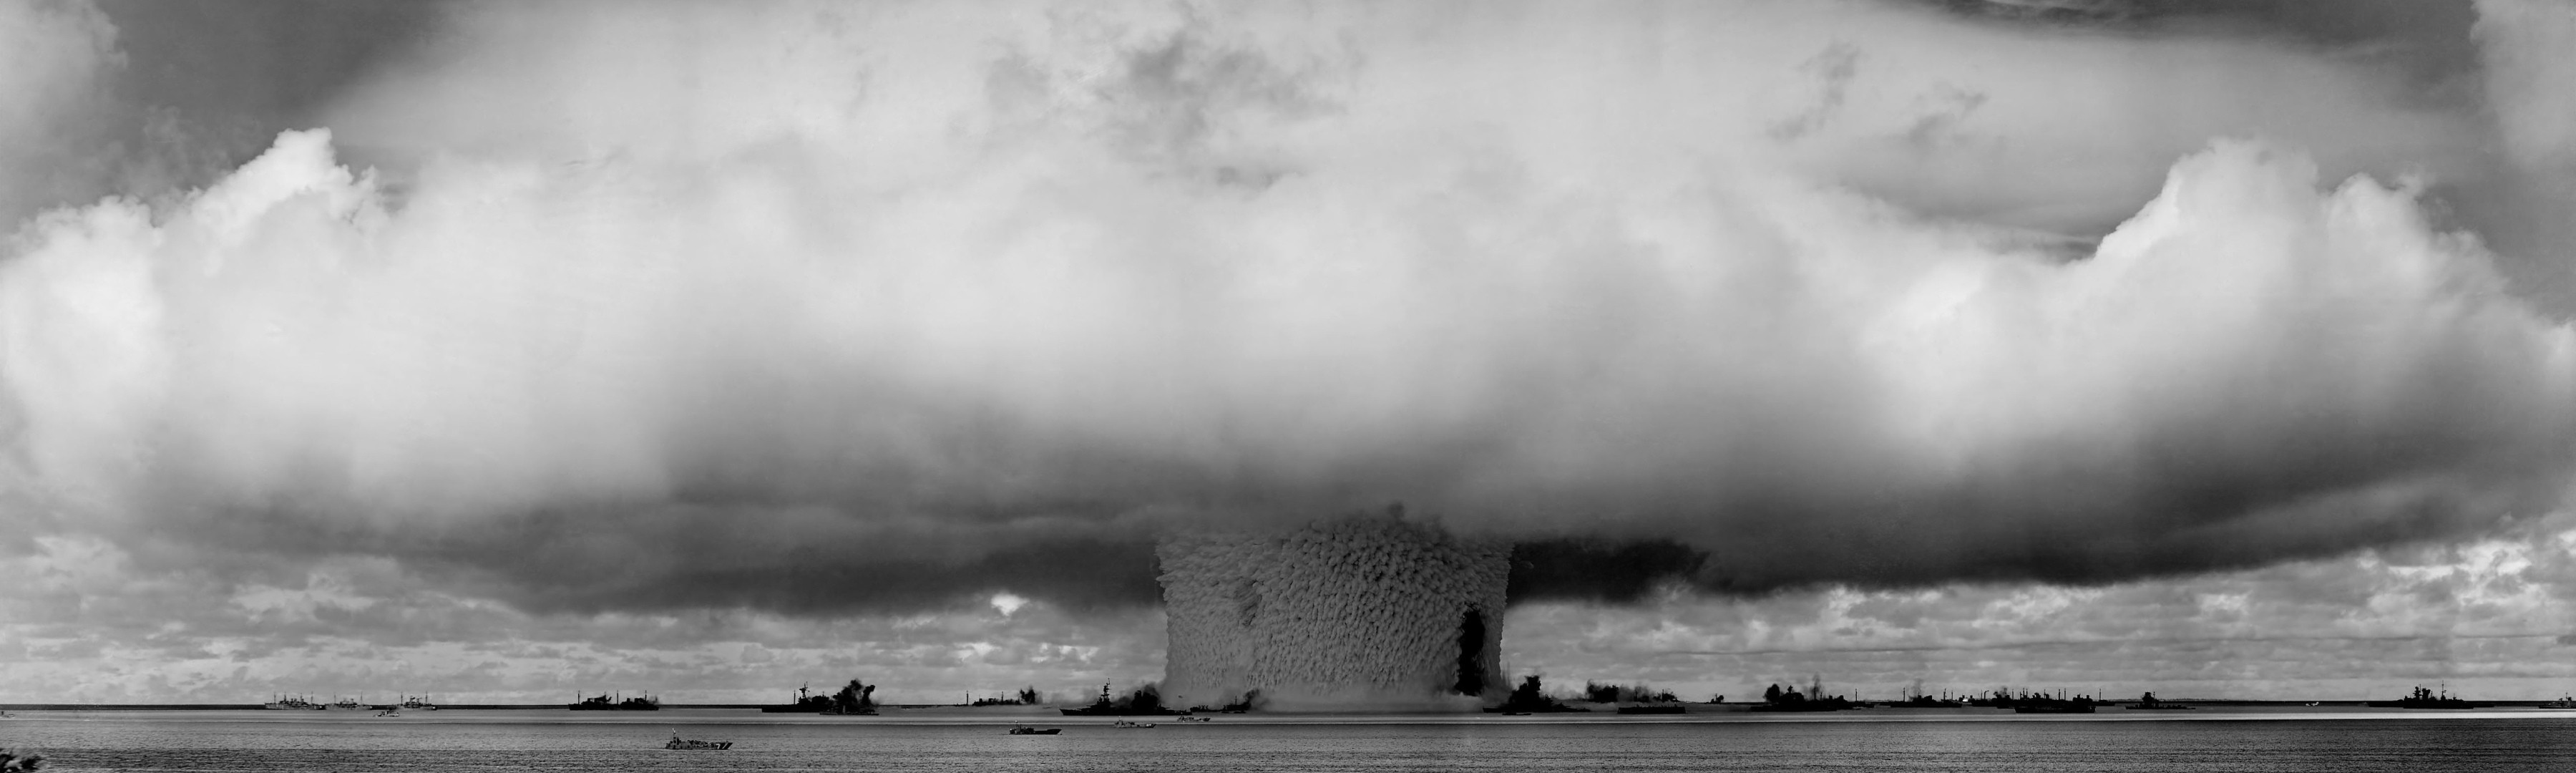 General 3600x1080 atomic bomb monochrome history explosion nuclear mushroom clouds